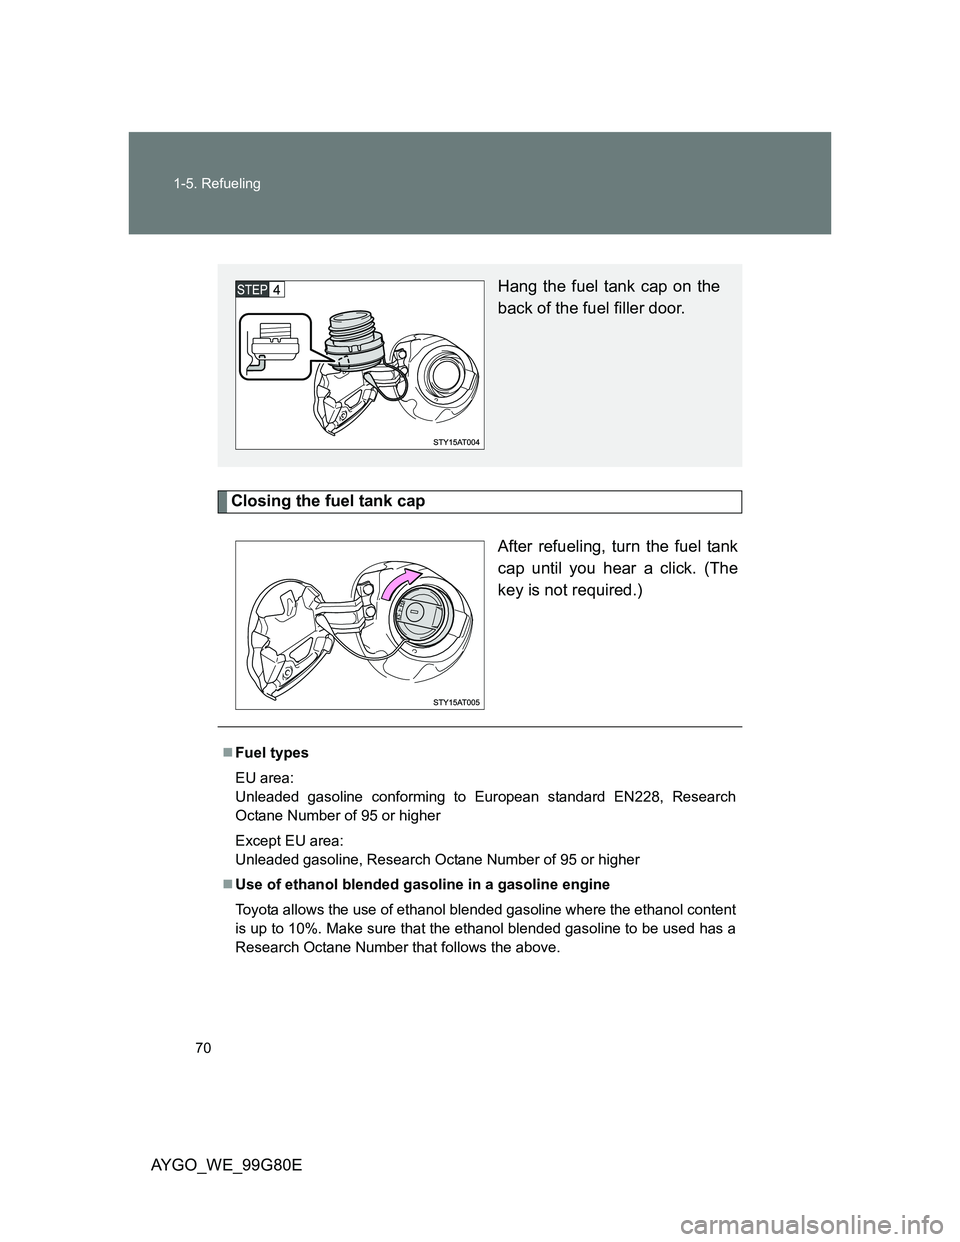 TOYOTA AYGO 2013  Owners Manual (in English) 70 1-5. Refueling
AYGO_WE_99G80E
Closing the fuel tank cap
After refueling, turn the fuel tank
cap until you hear a click. (The
key is not required.)
Hang the fuel tank cap on the
back of the fuel fil